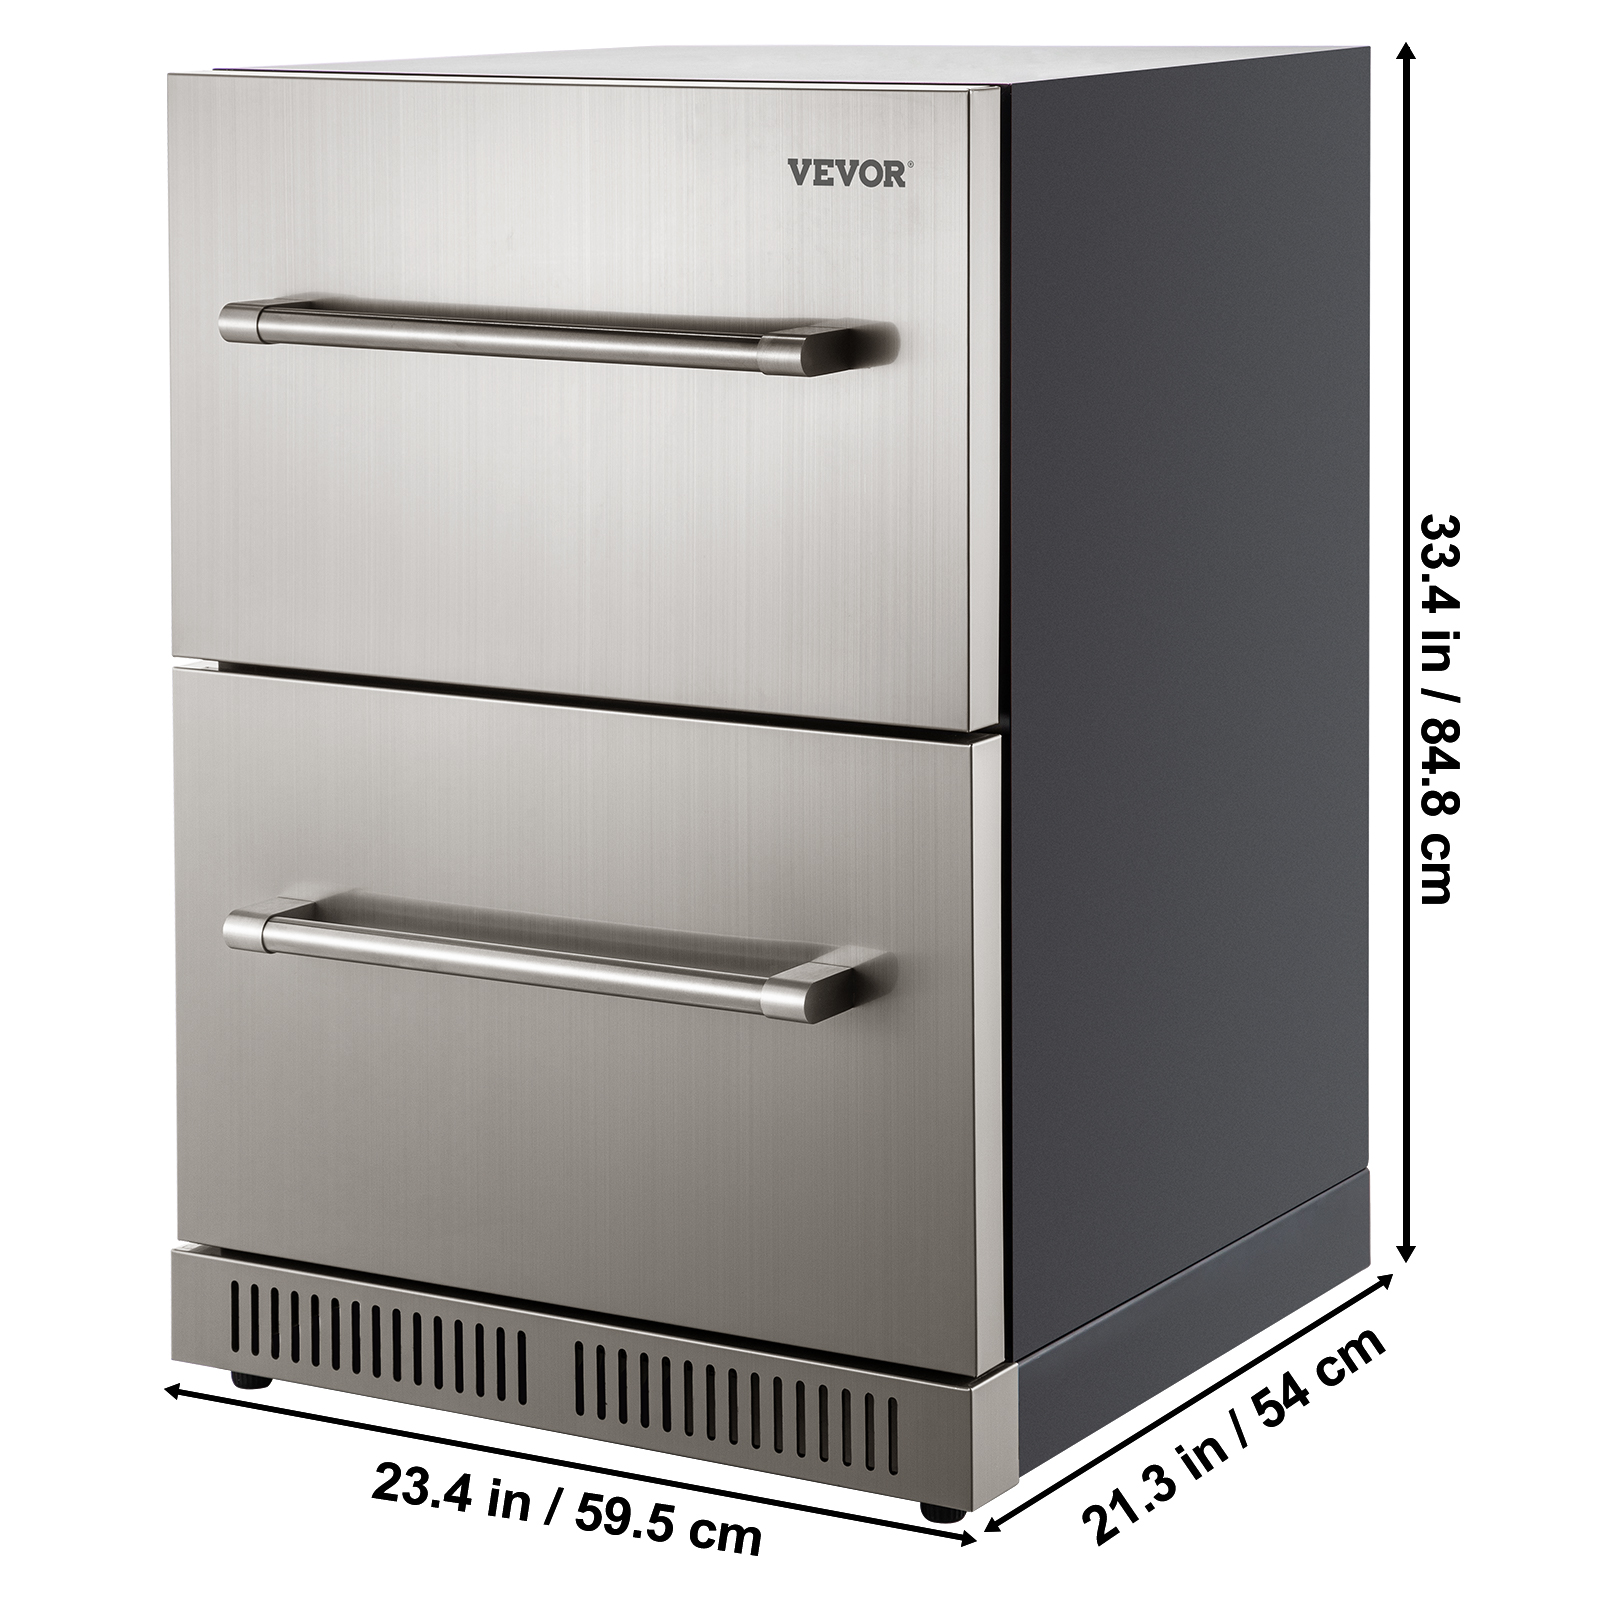 VEVOR 24" Undercounter Built-in Refrigerator 5.12 Cu.ft. Double Drawer Indoor/Outdoor Beverage Fridge with 32-99°F Range, Ventilated Cooling for Home and Commercial Use Stainless Steel, Silver - image 4 of 9